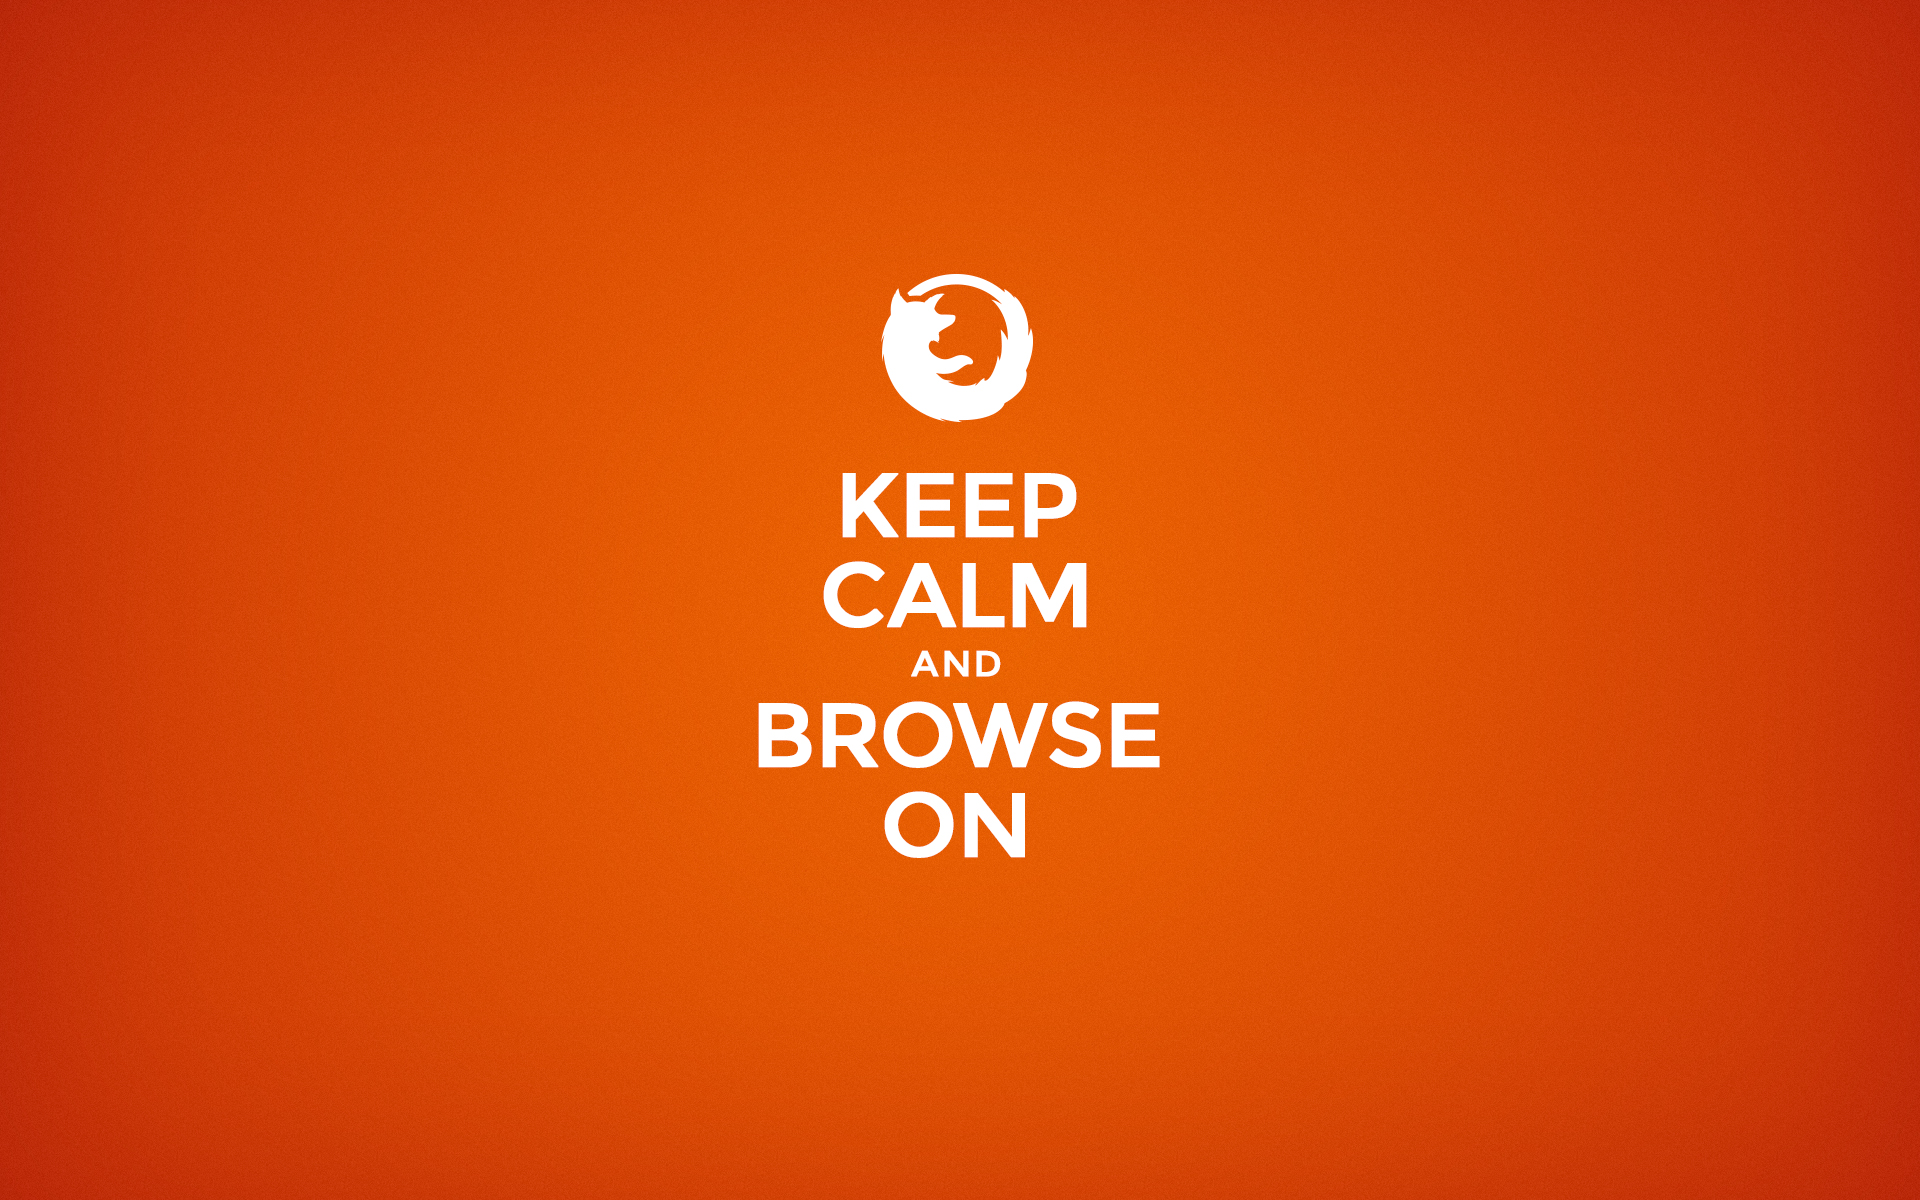 Keep Calm and Browse On